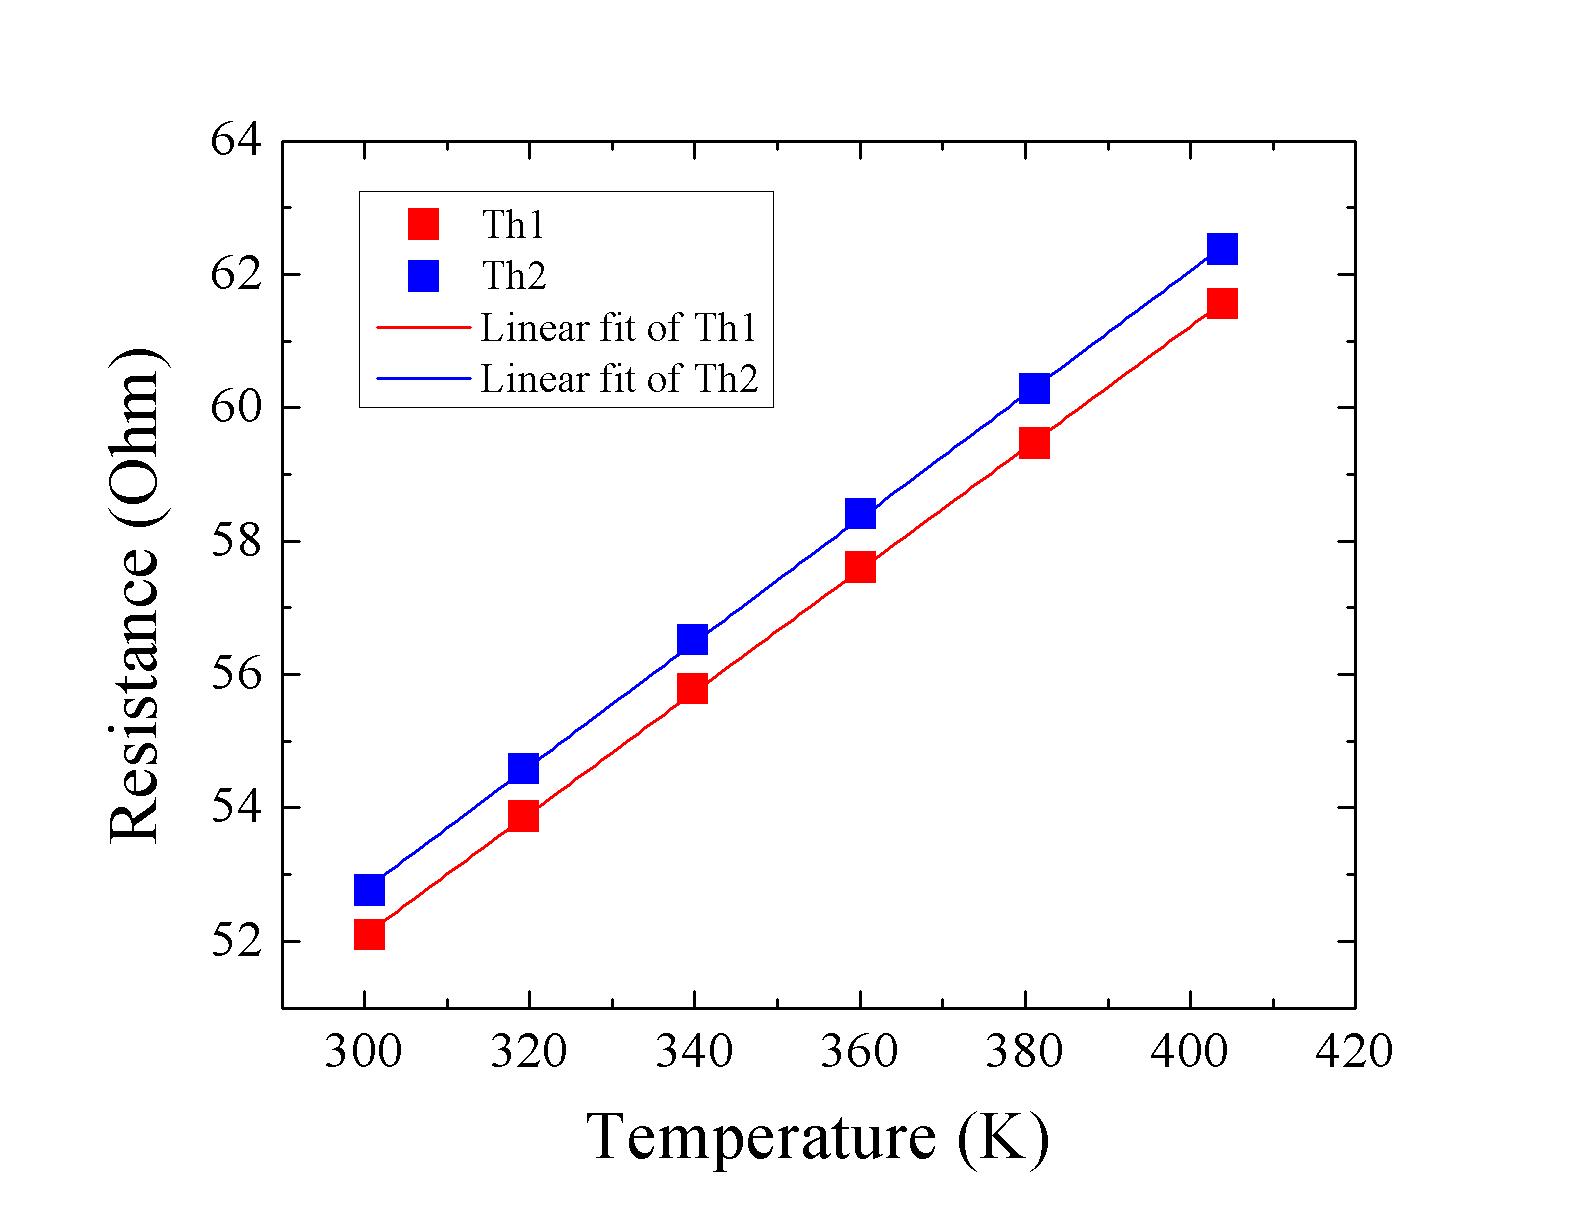 Variations of Pt resistance with the substrate temperature. The resistance of Pt line linearly increases with temperature.